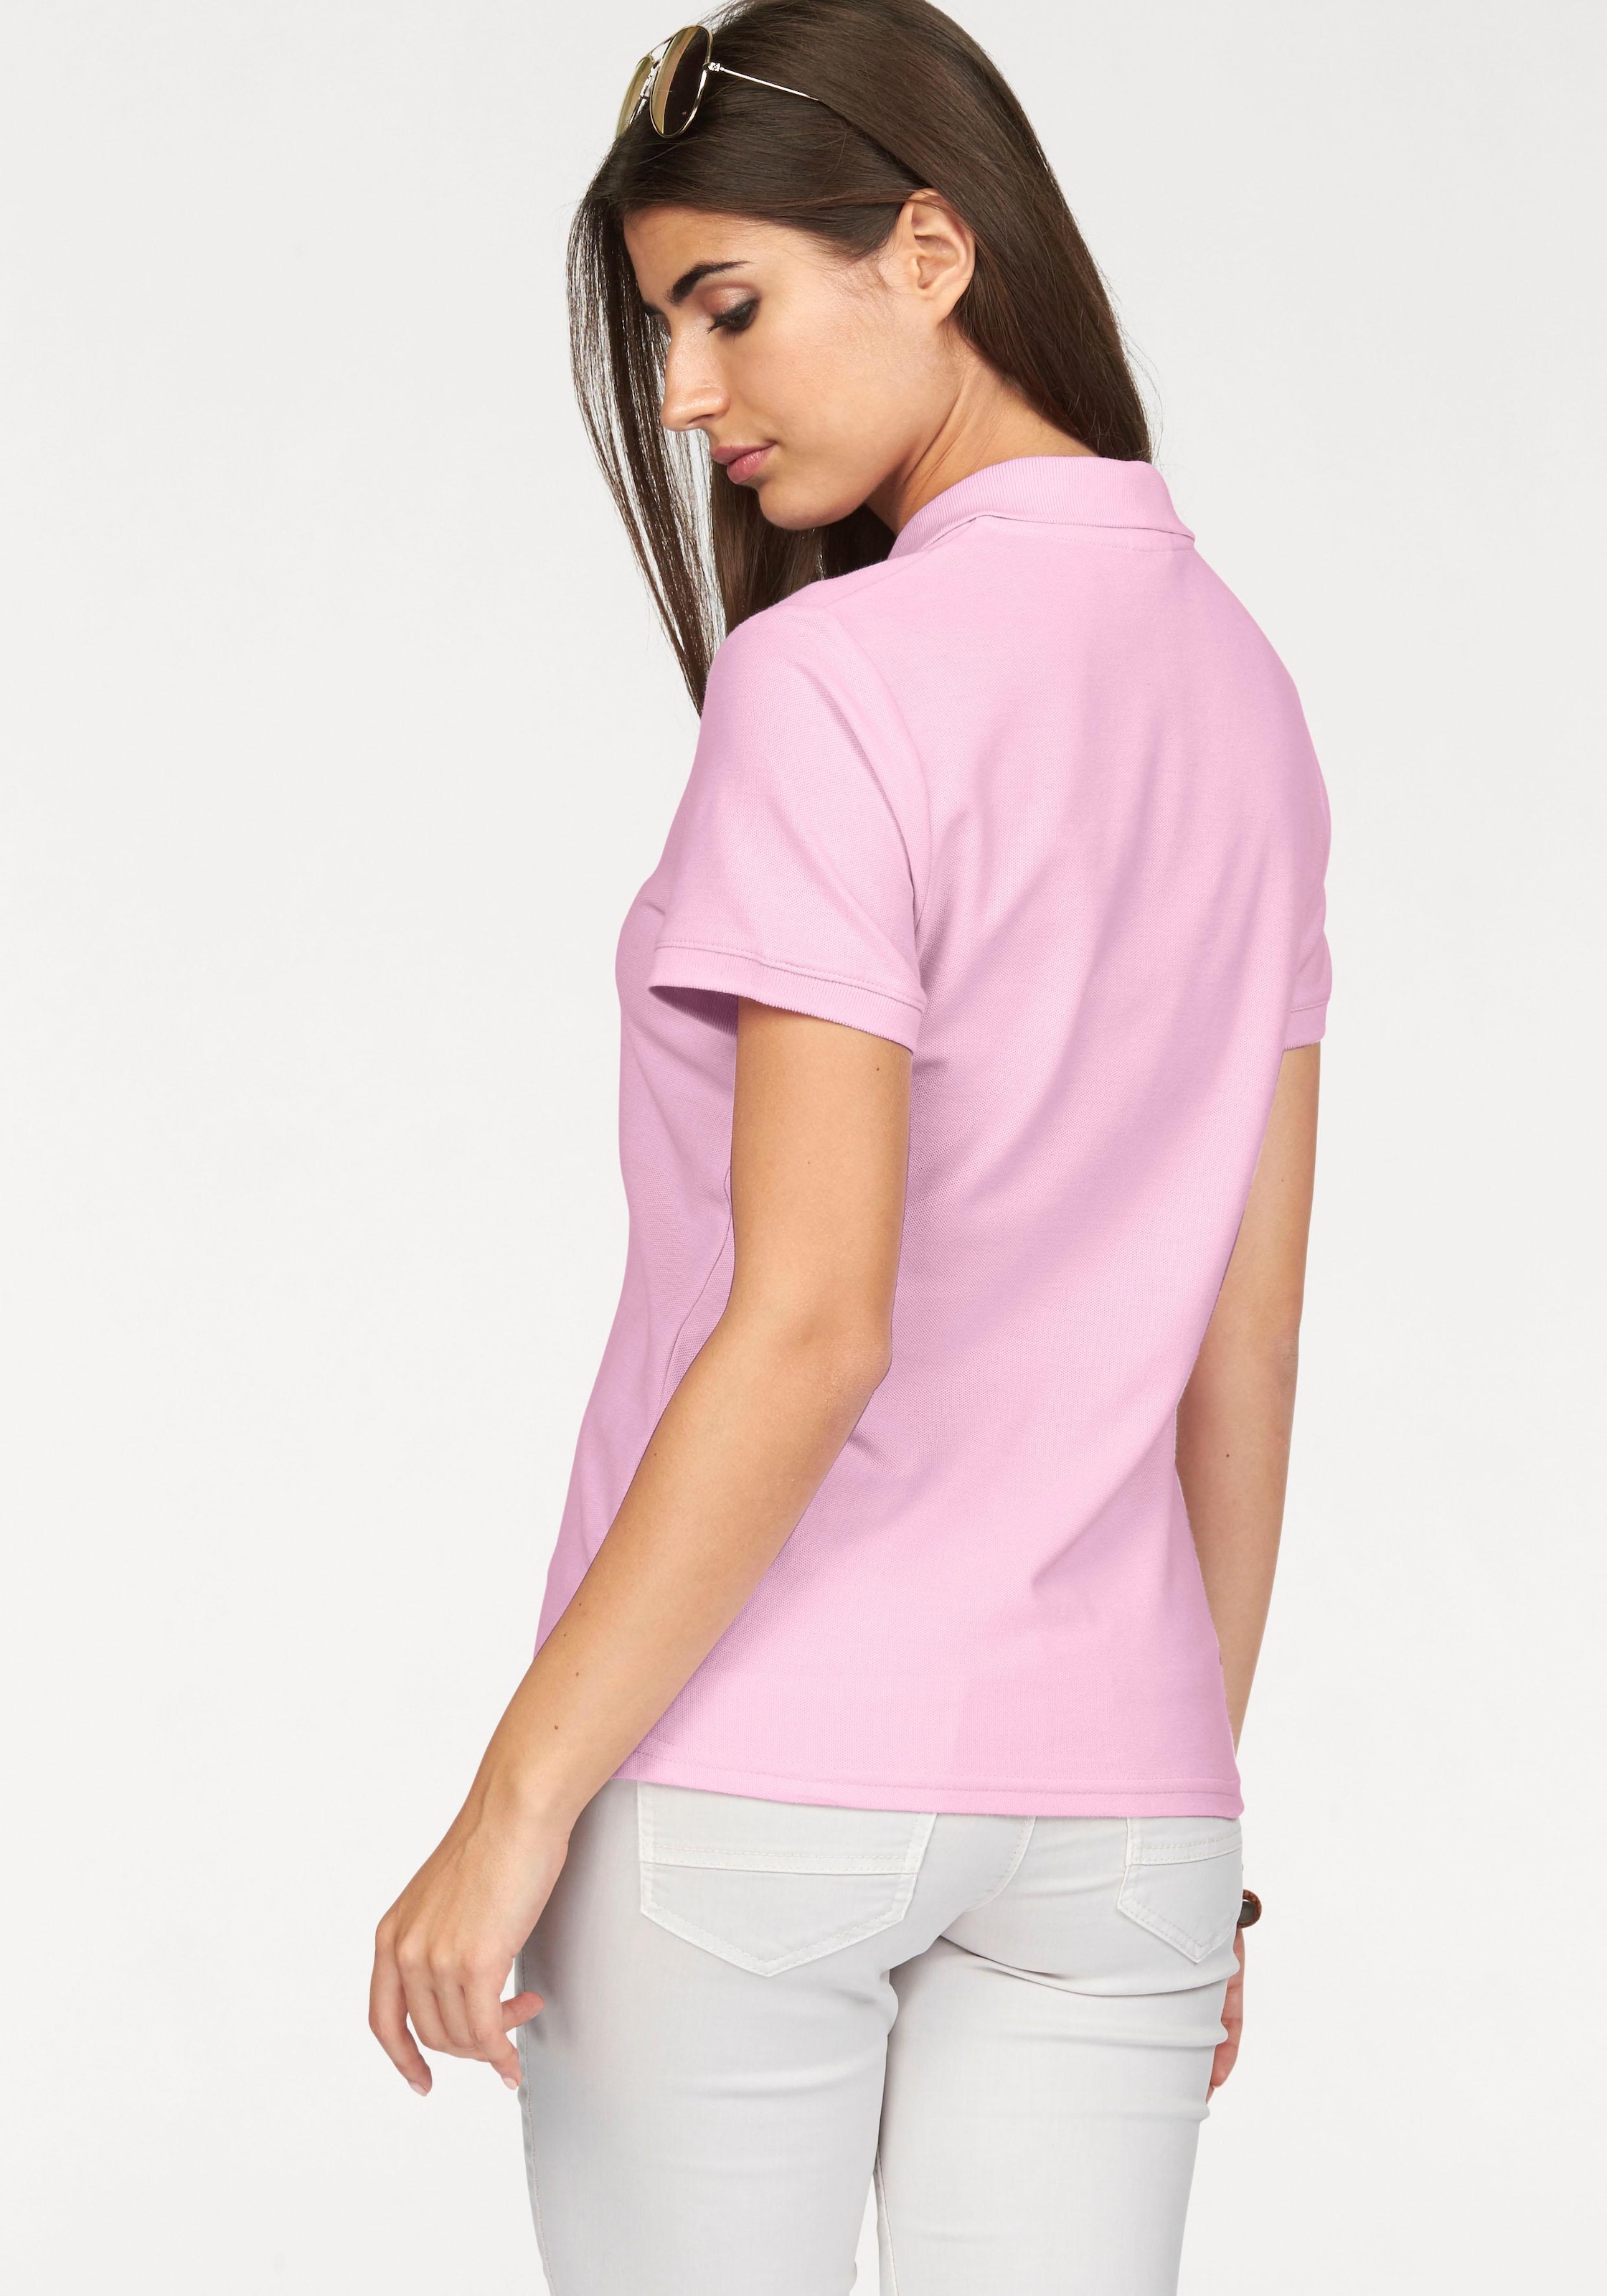 Fruit of the »Lady-Fit bei online Loom OTTO Poloshirt Polo« Premium